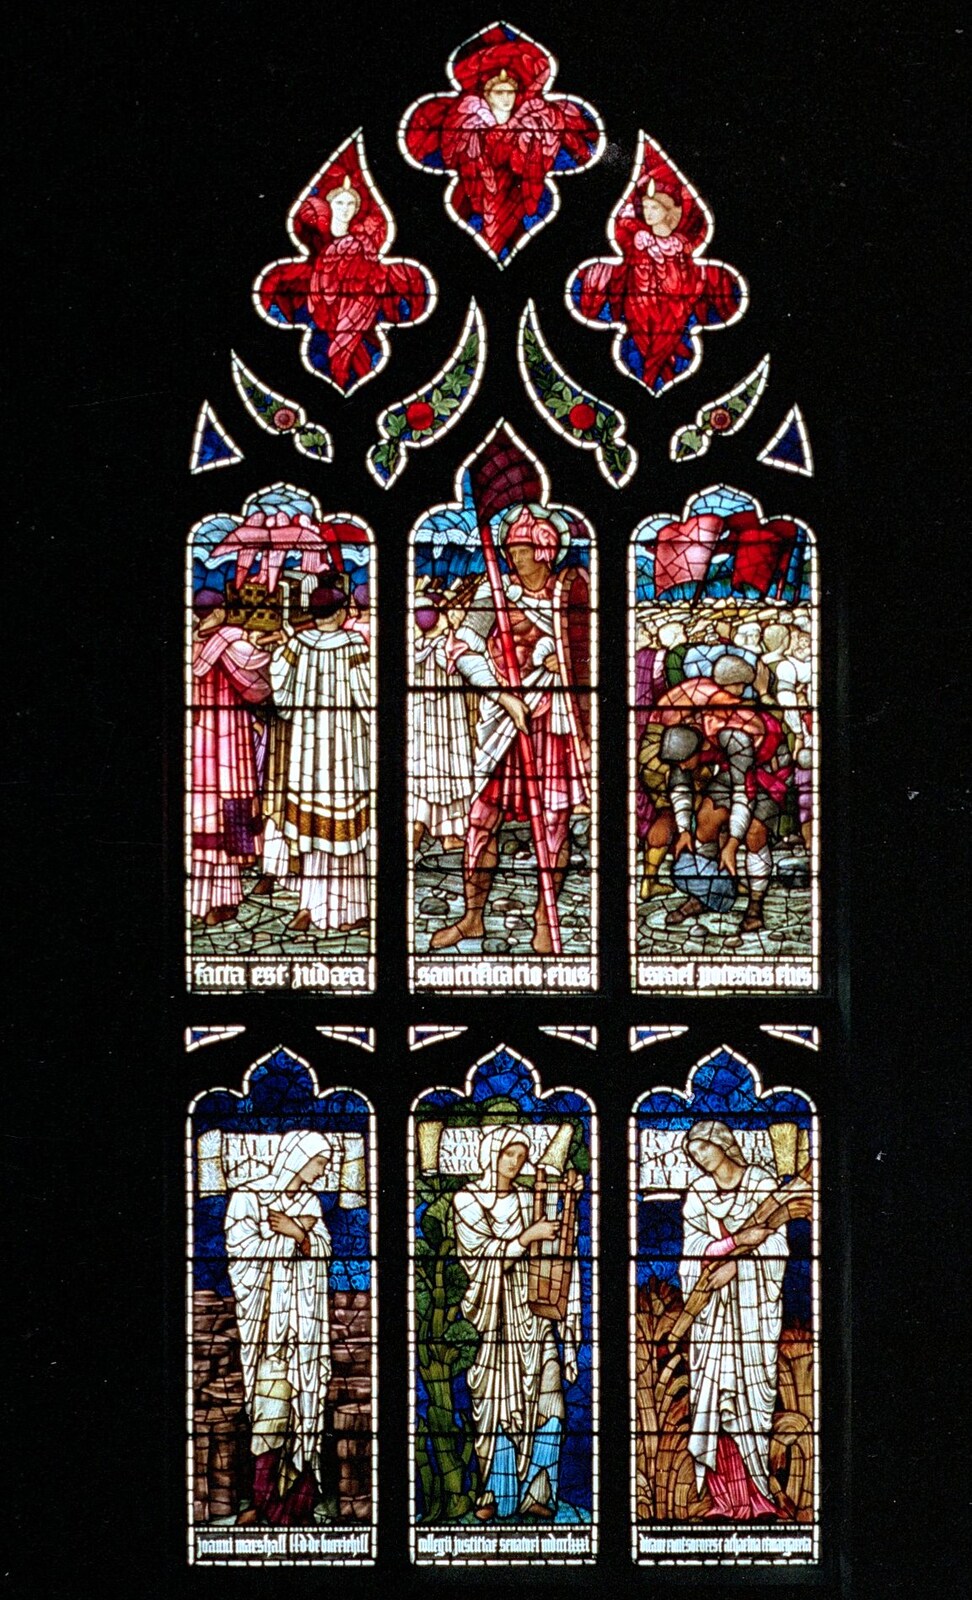 A stained glass window from Uni: A Trip To Glasgow and Edinburgh, Scotland - 15th May 1989